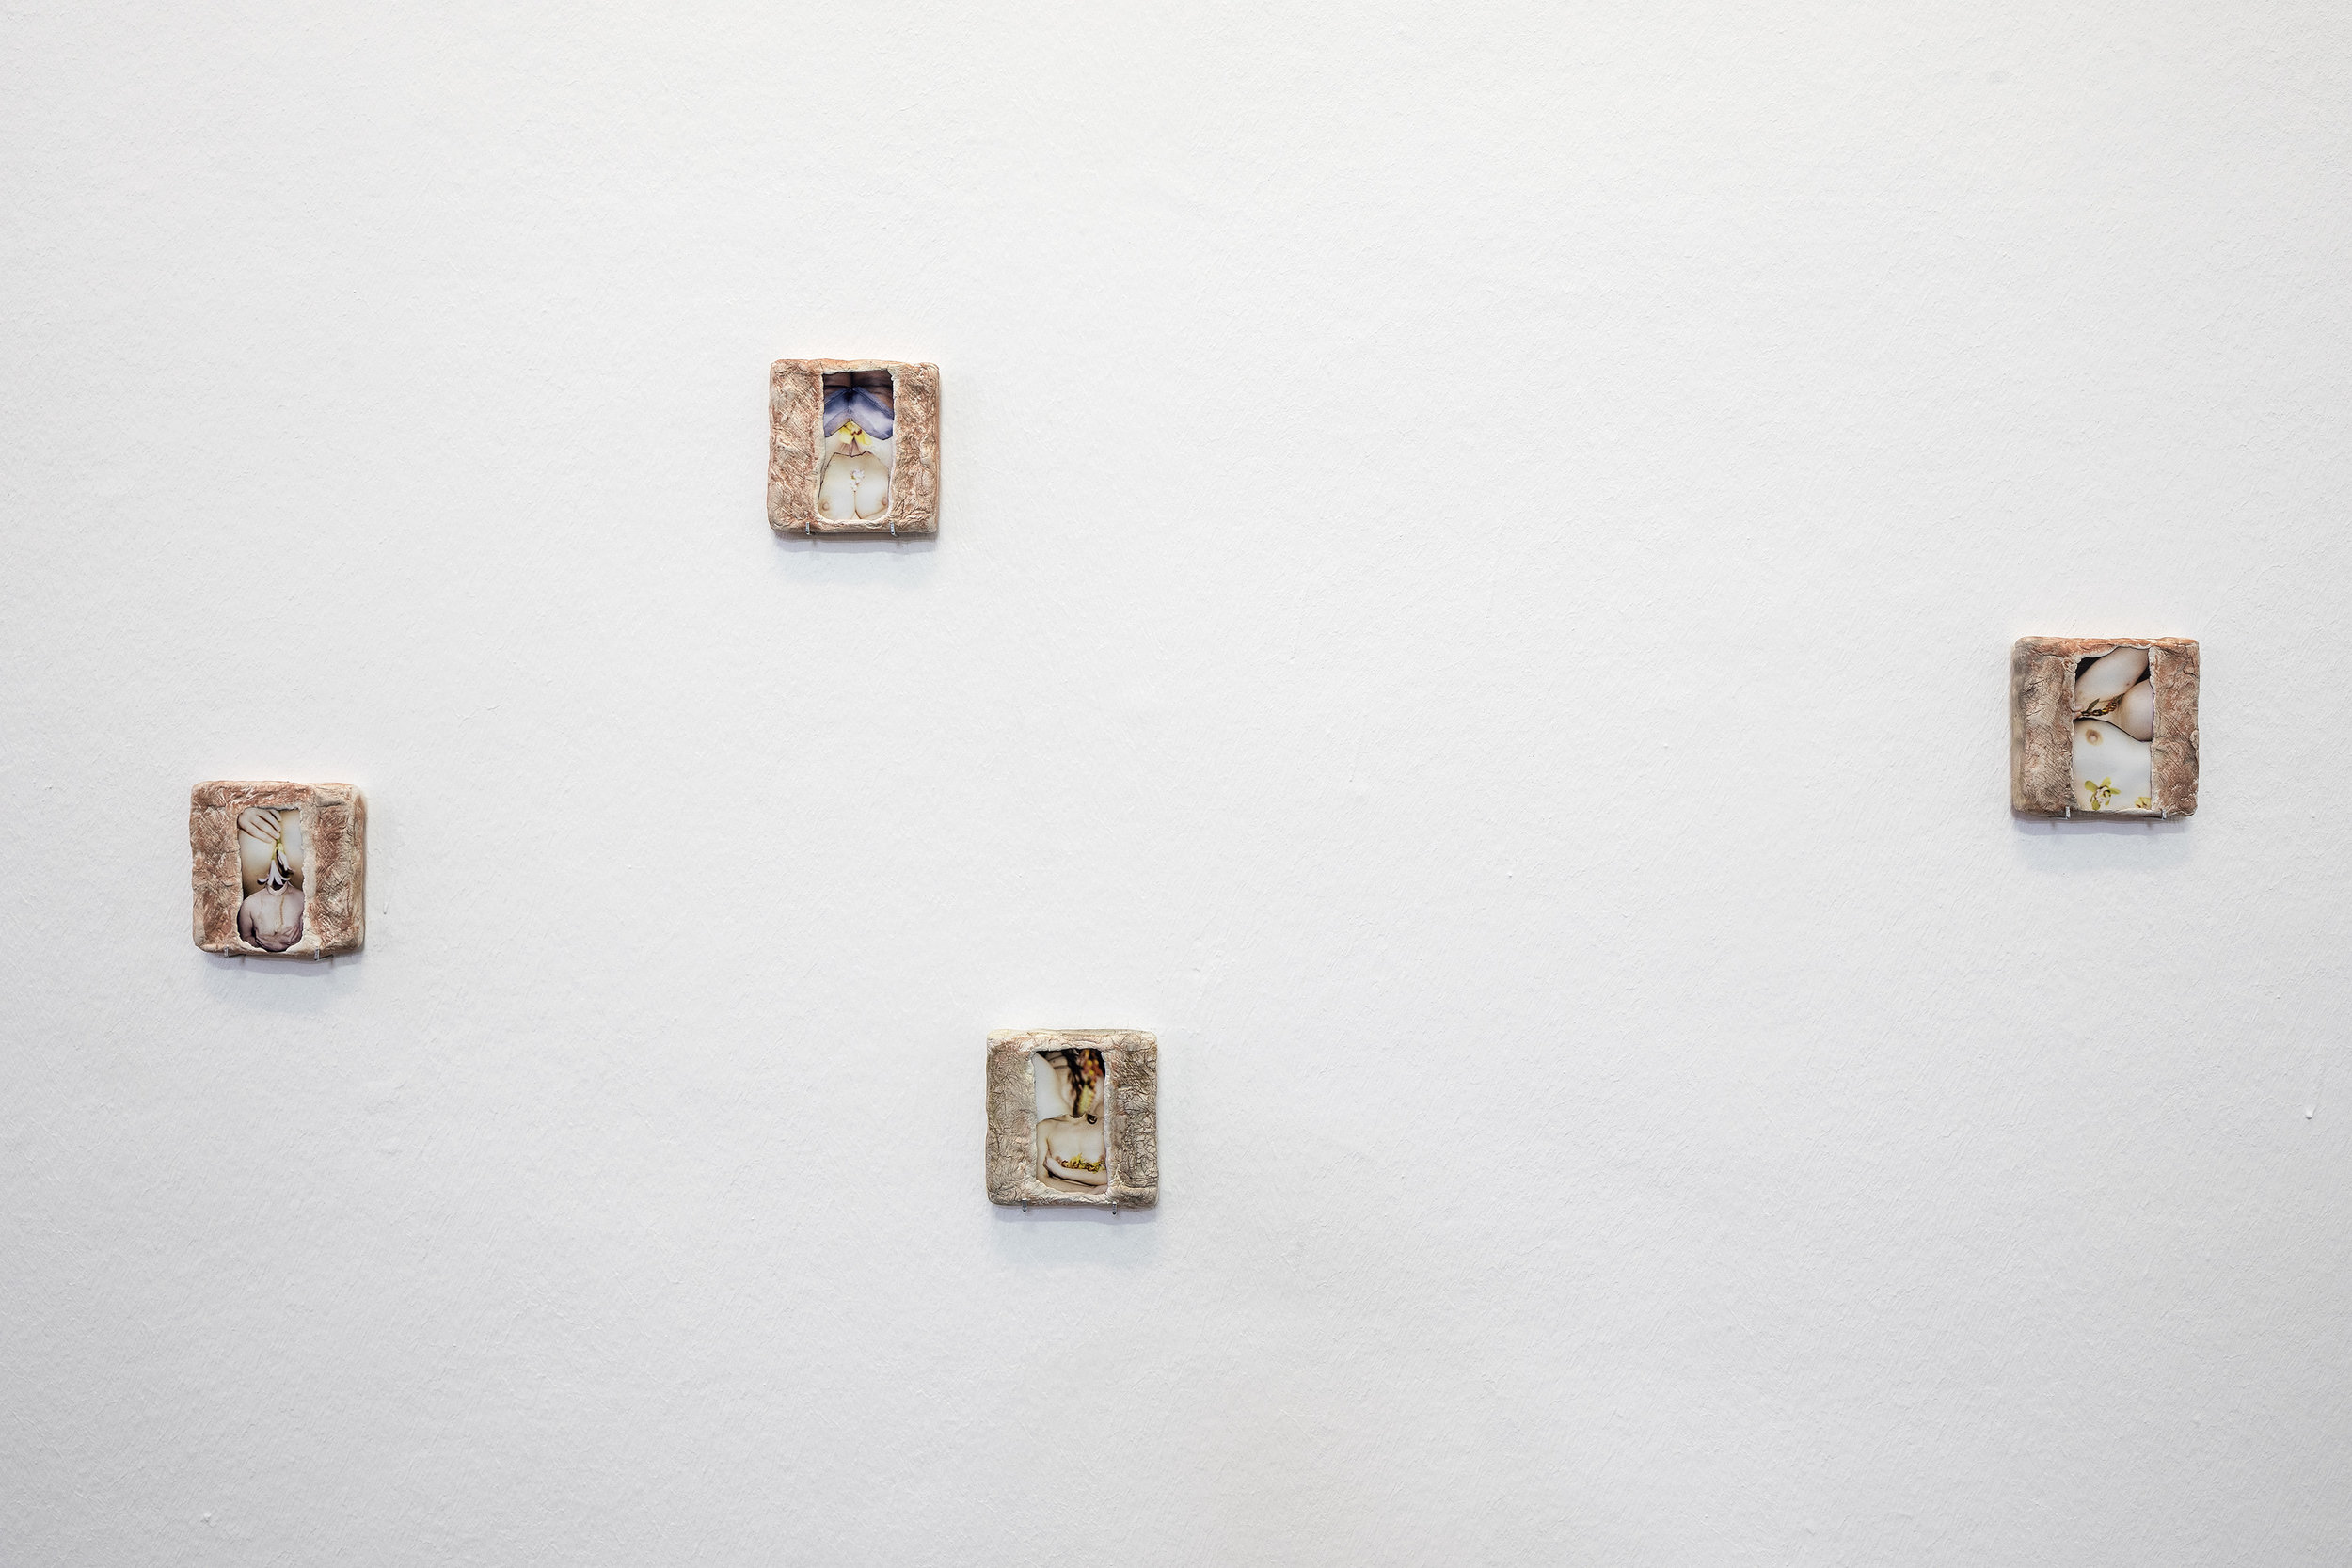  I Never Found Those Lips Again,2019  Polaroid collages, dry air clay, pigment  Photo: Andrew Phelps 